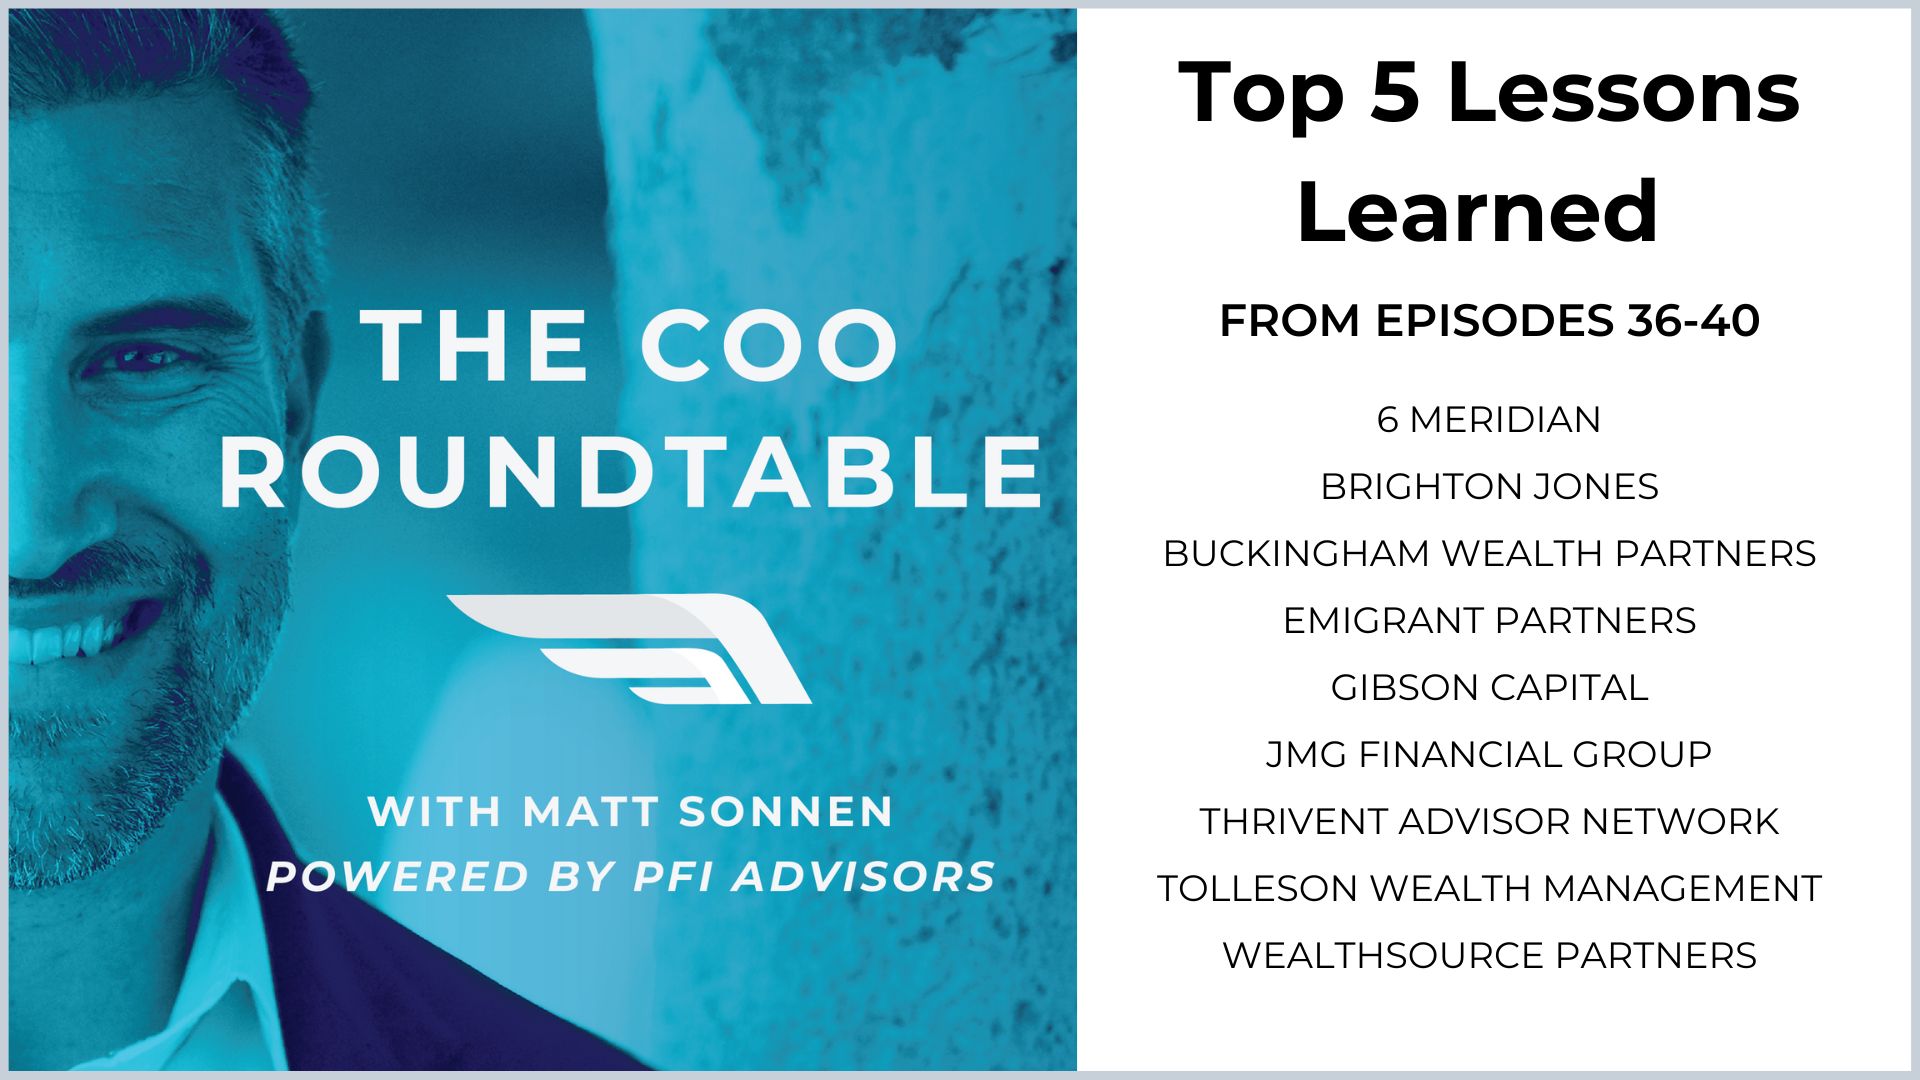 Top 5 Lessons Learned from Episodes  36-40 of The COO Roundtable